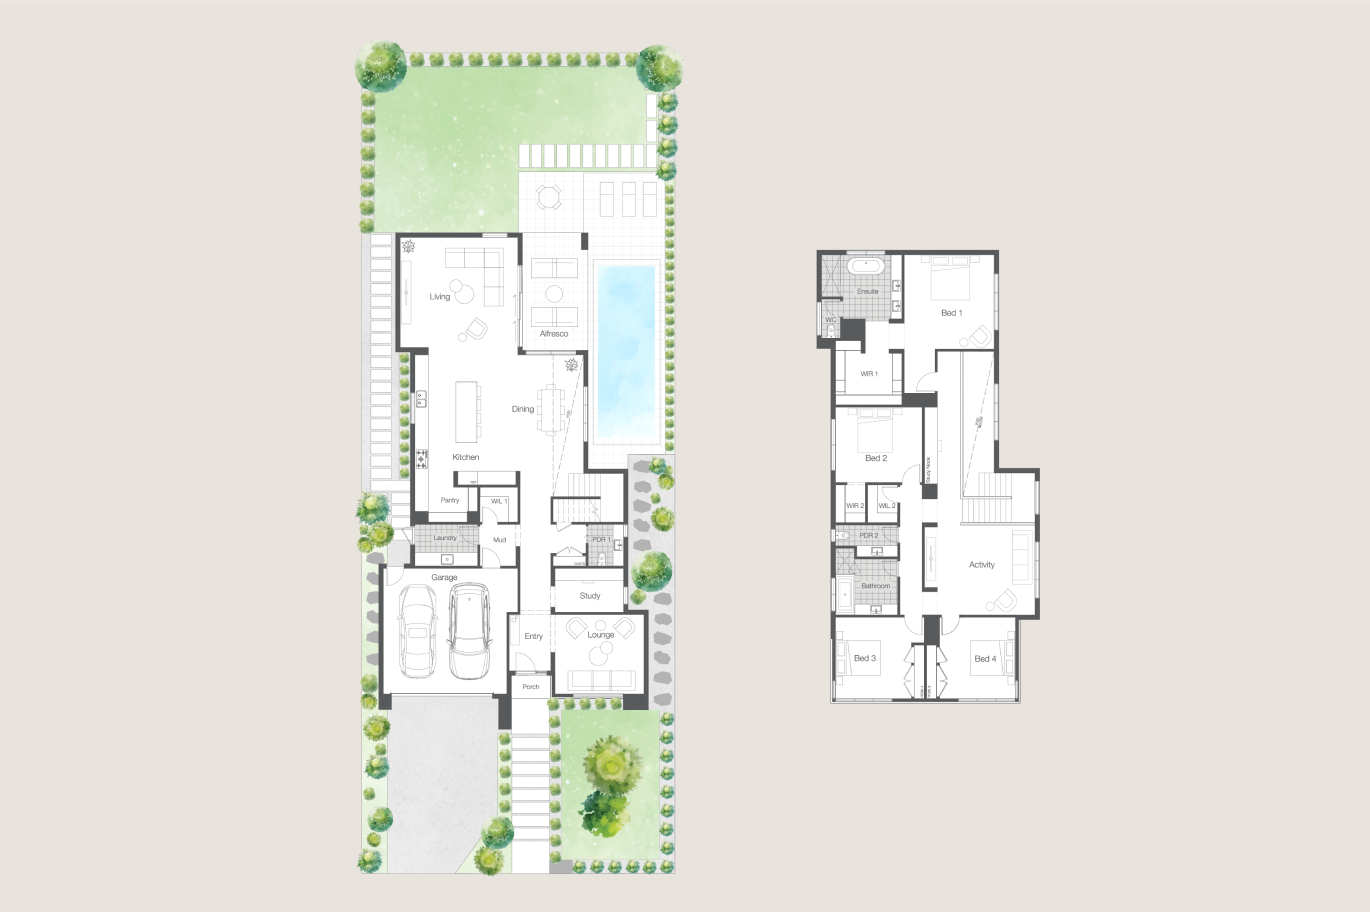 A house floor plan featuring a pool, showcasing the layout and dimensions of the rooms and the pool area.